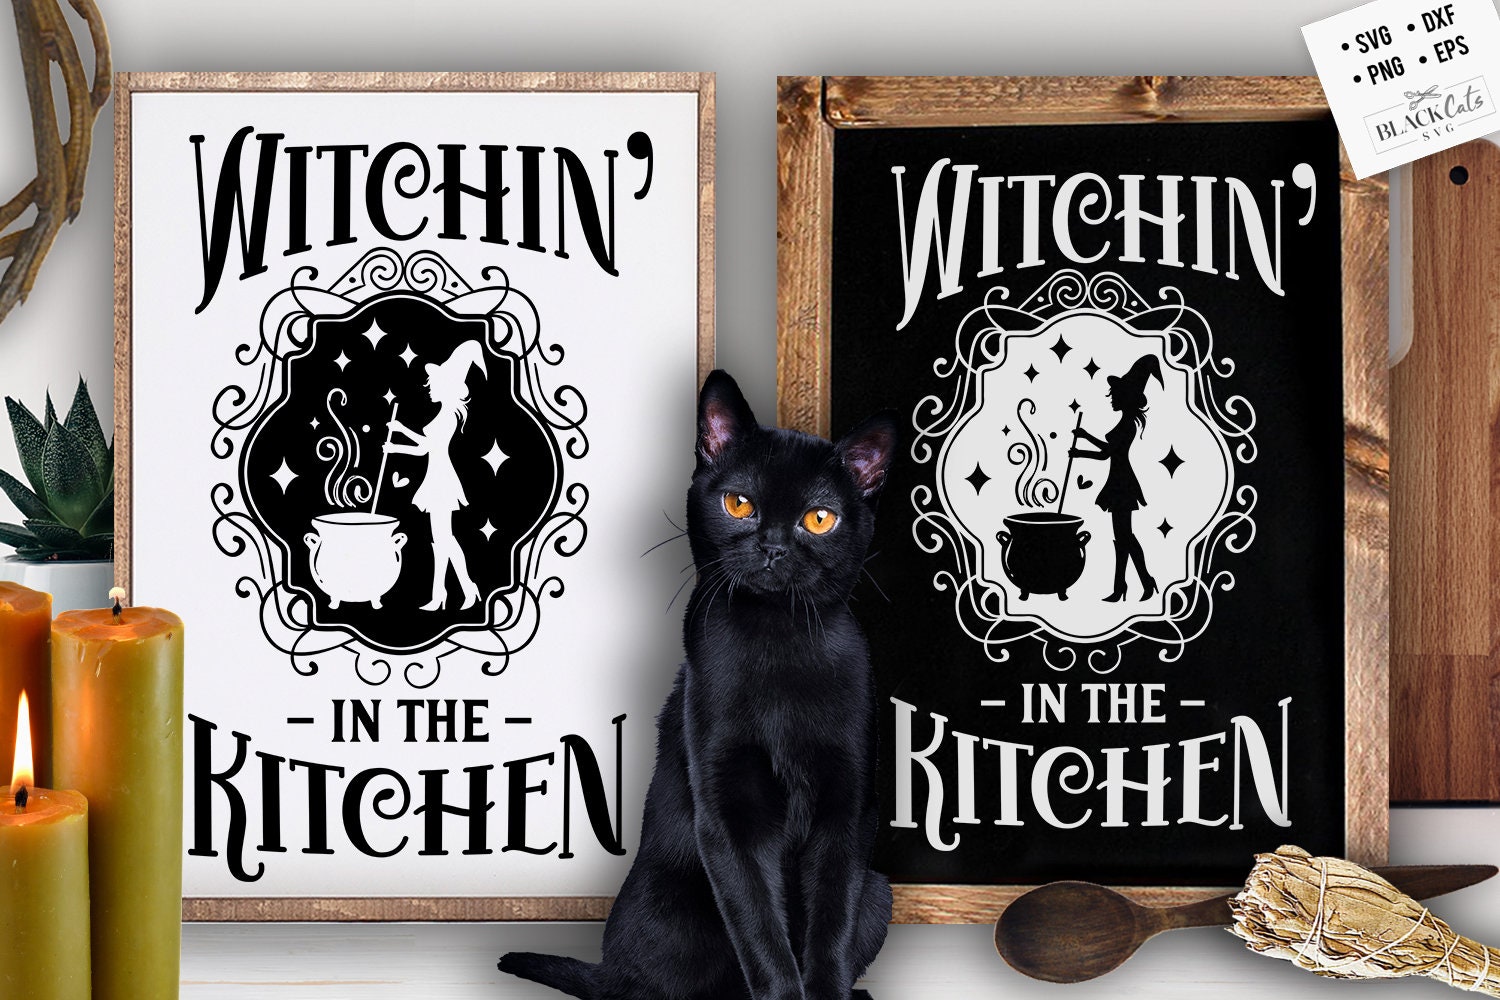 This kitchen is guarded by magical cats SVG, Witch kitchen s - Inspire  Uplift